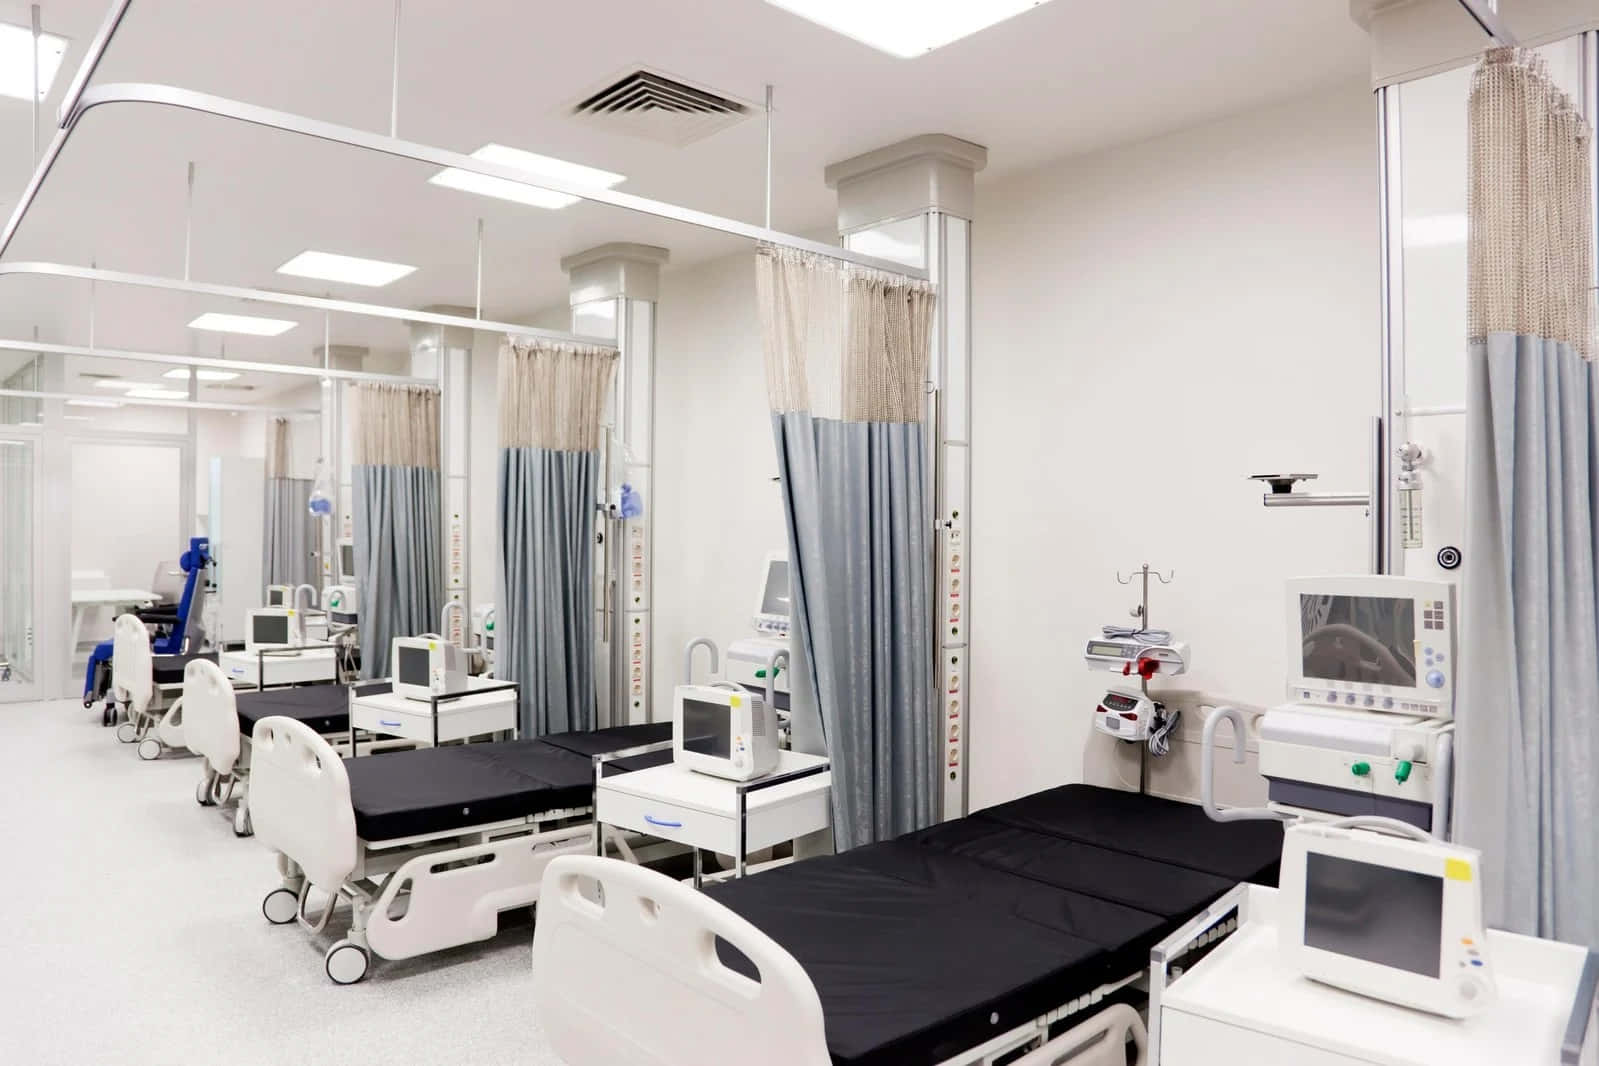 A Hospital Room With Beds And Curtains